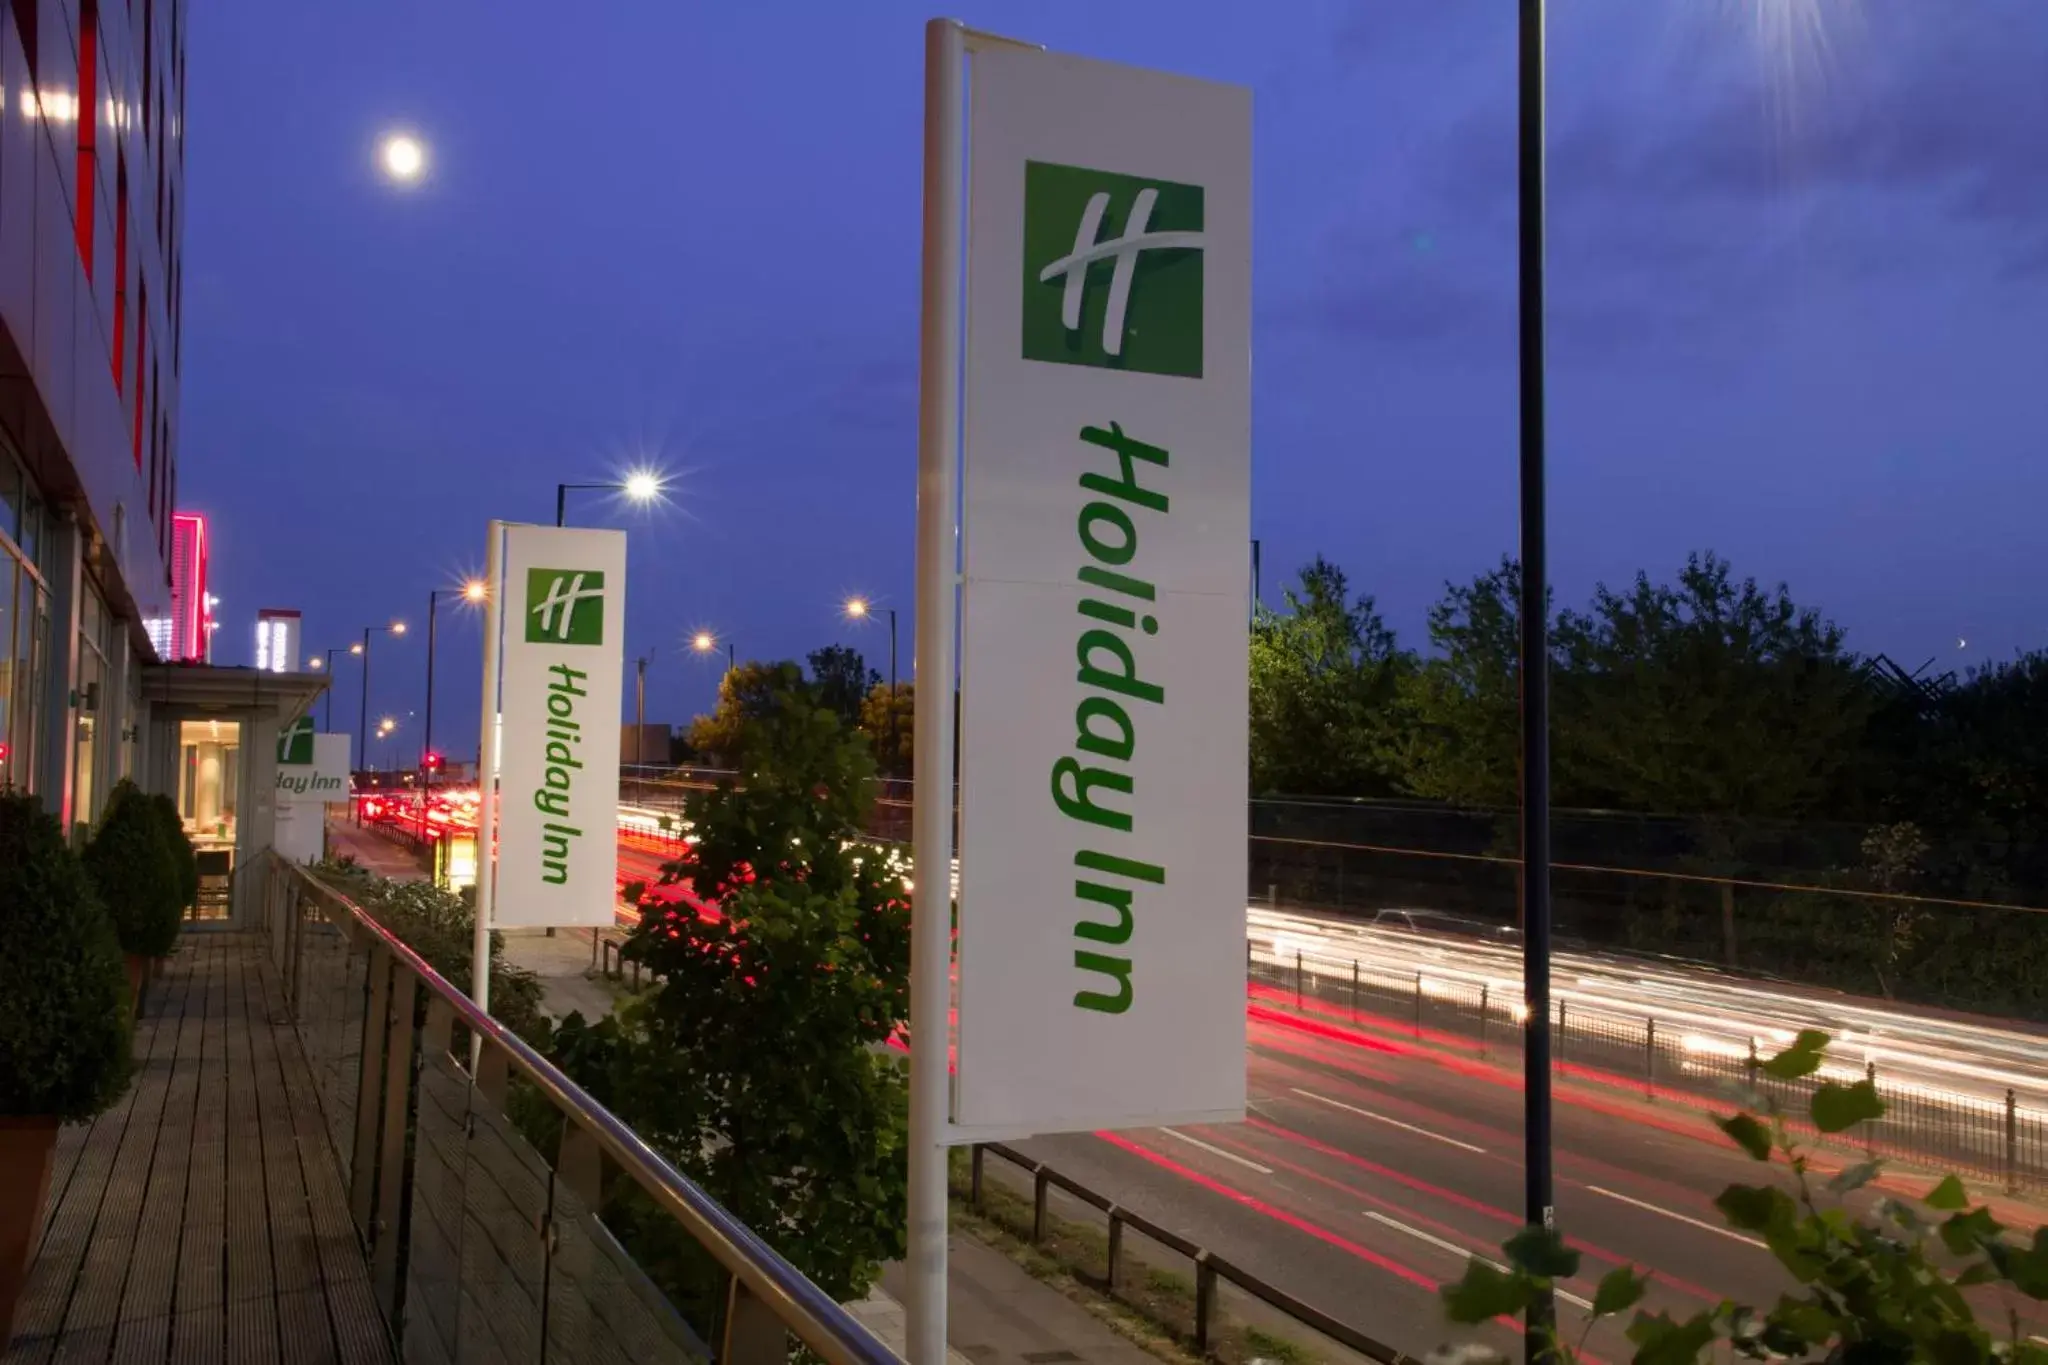 Property building in Holiday Inn London West, an IHG Hotel